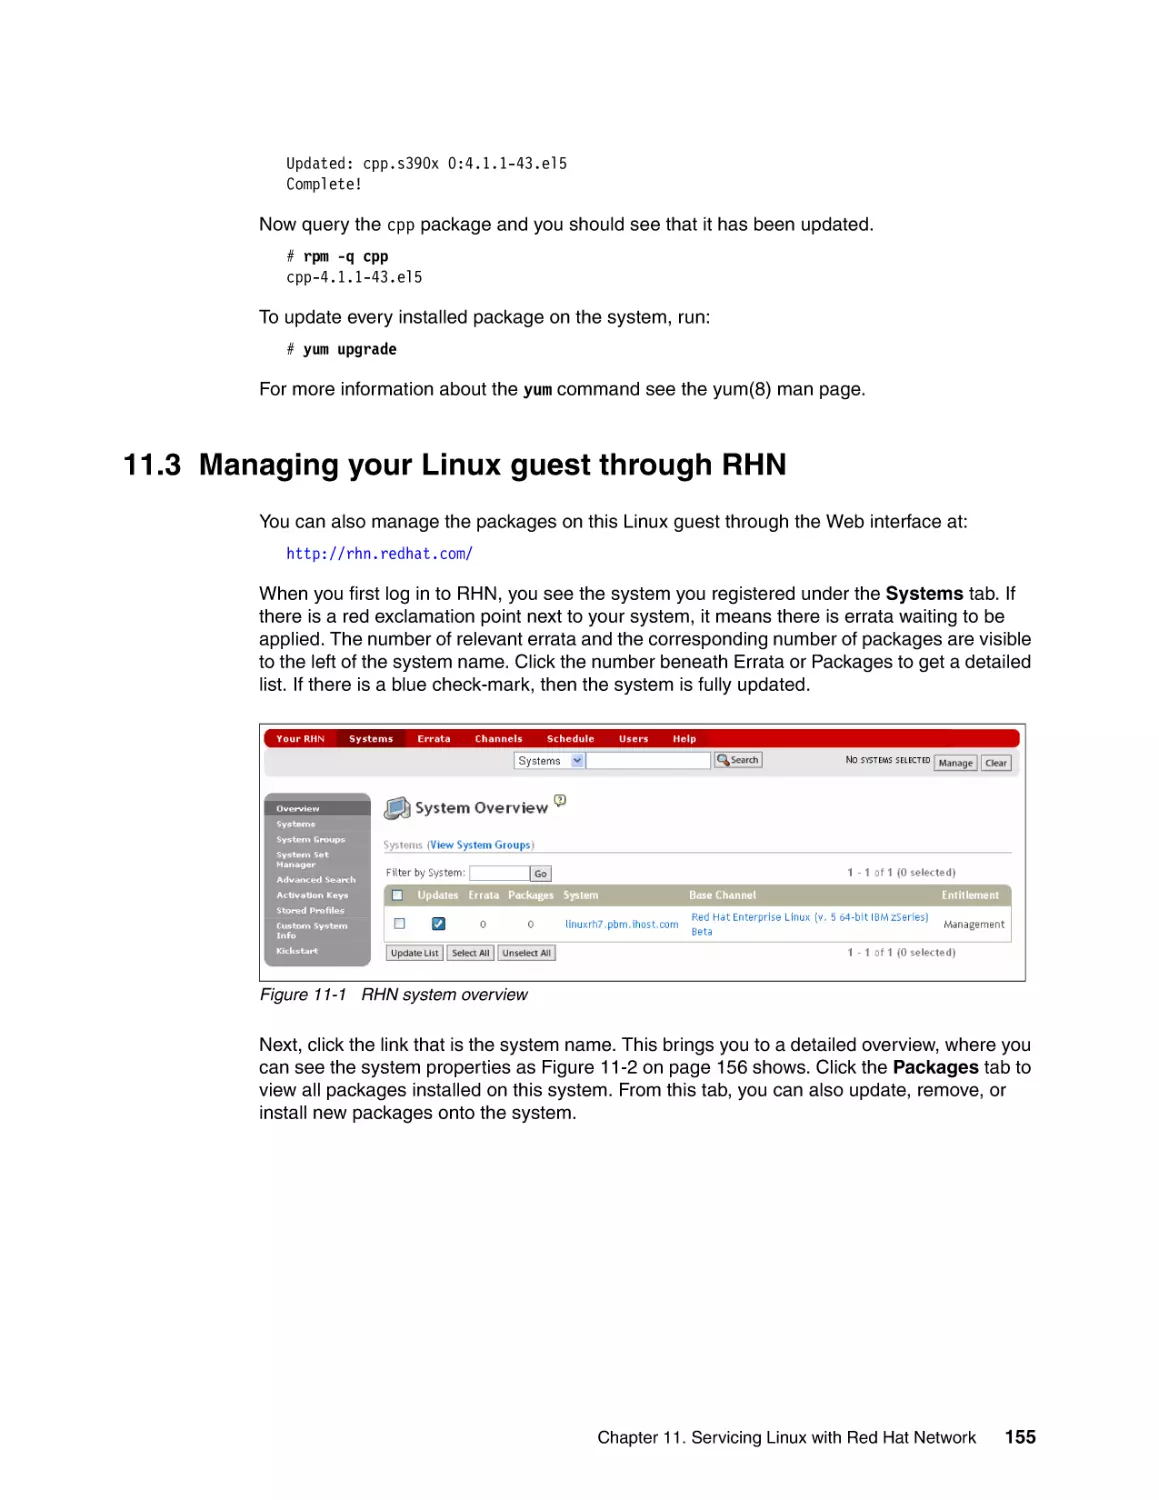 11.3 Managing your Linux guest through RHN